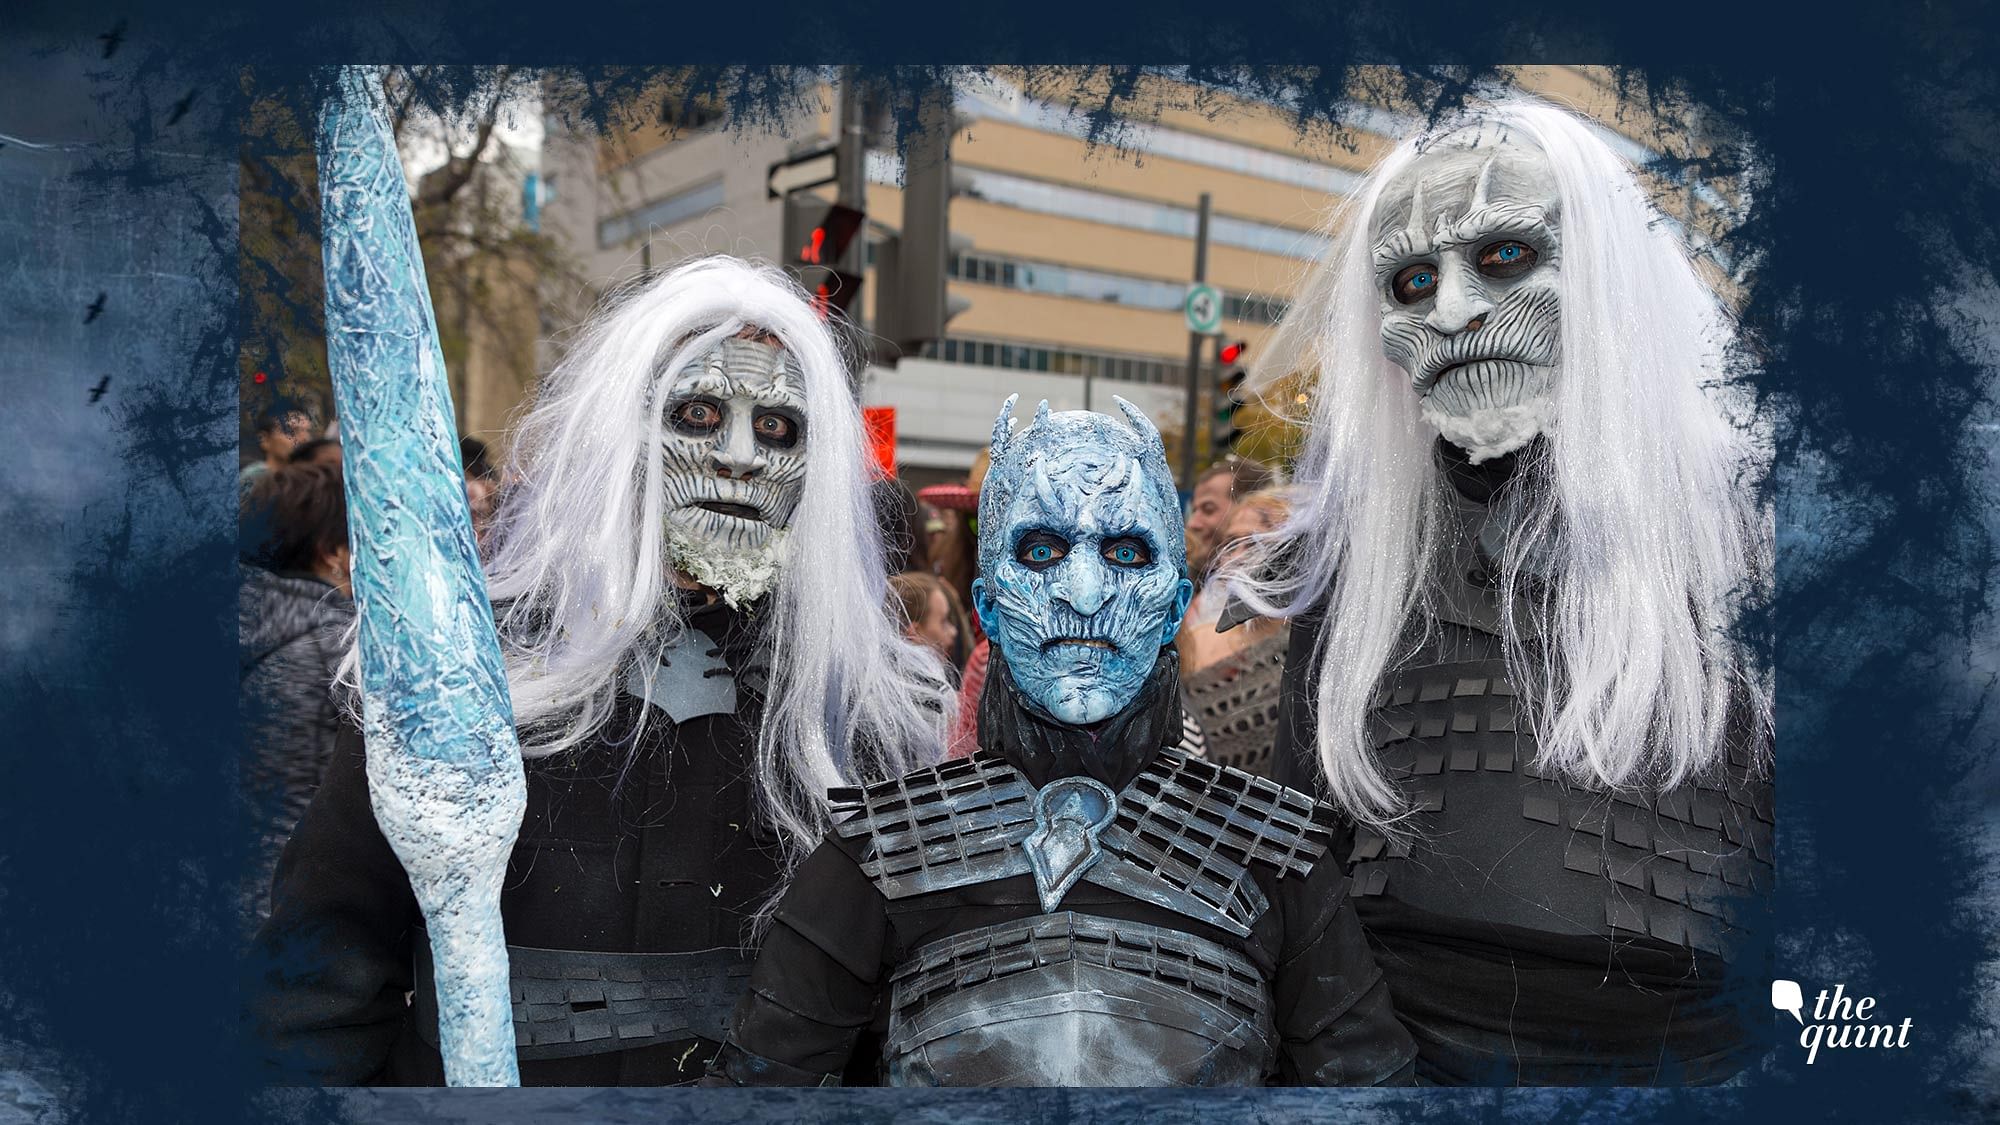 October 28, 2017: Game of Thrones White Walkers and Night King taking part in the Zombie Walk in Montreal Downtown, Canada. Representational image.